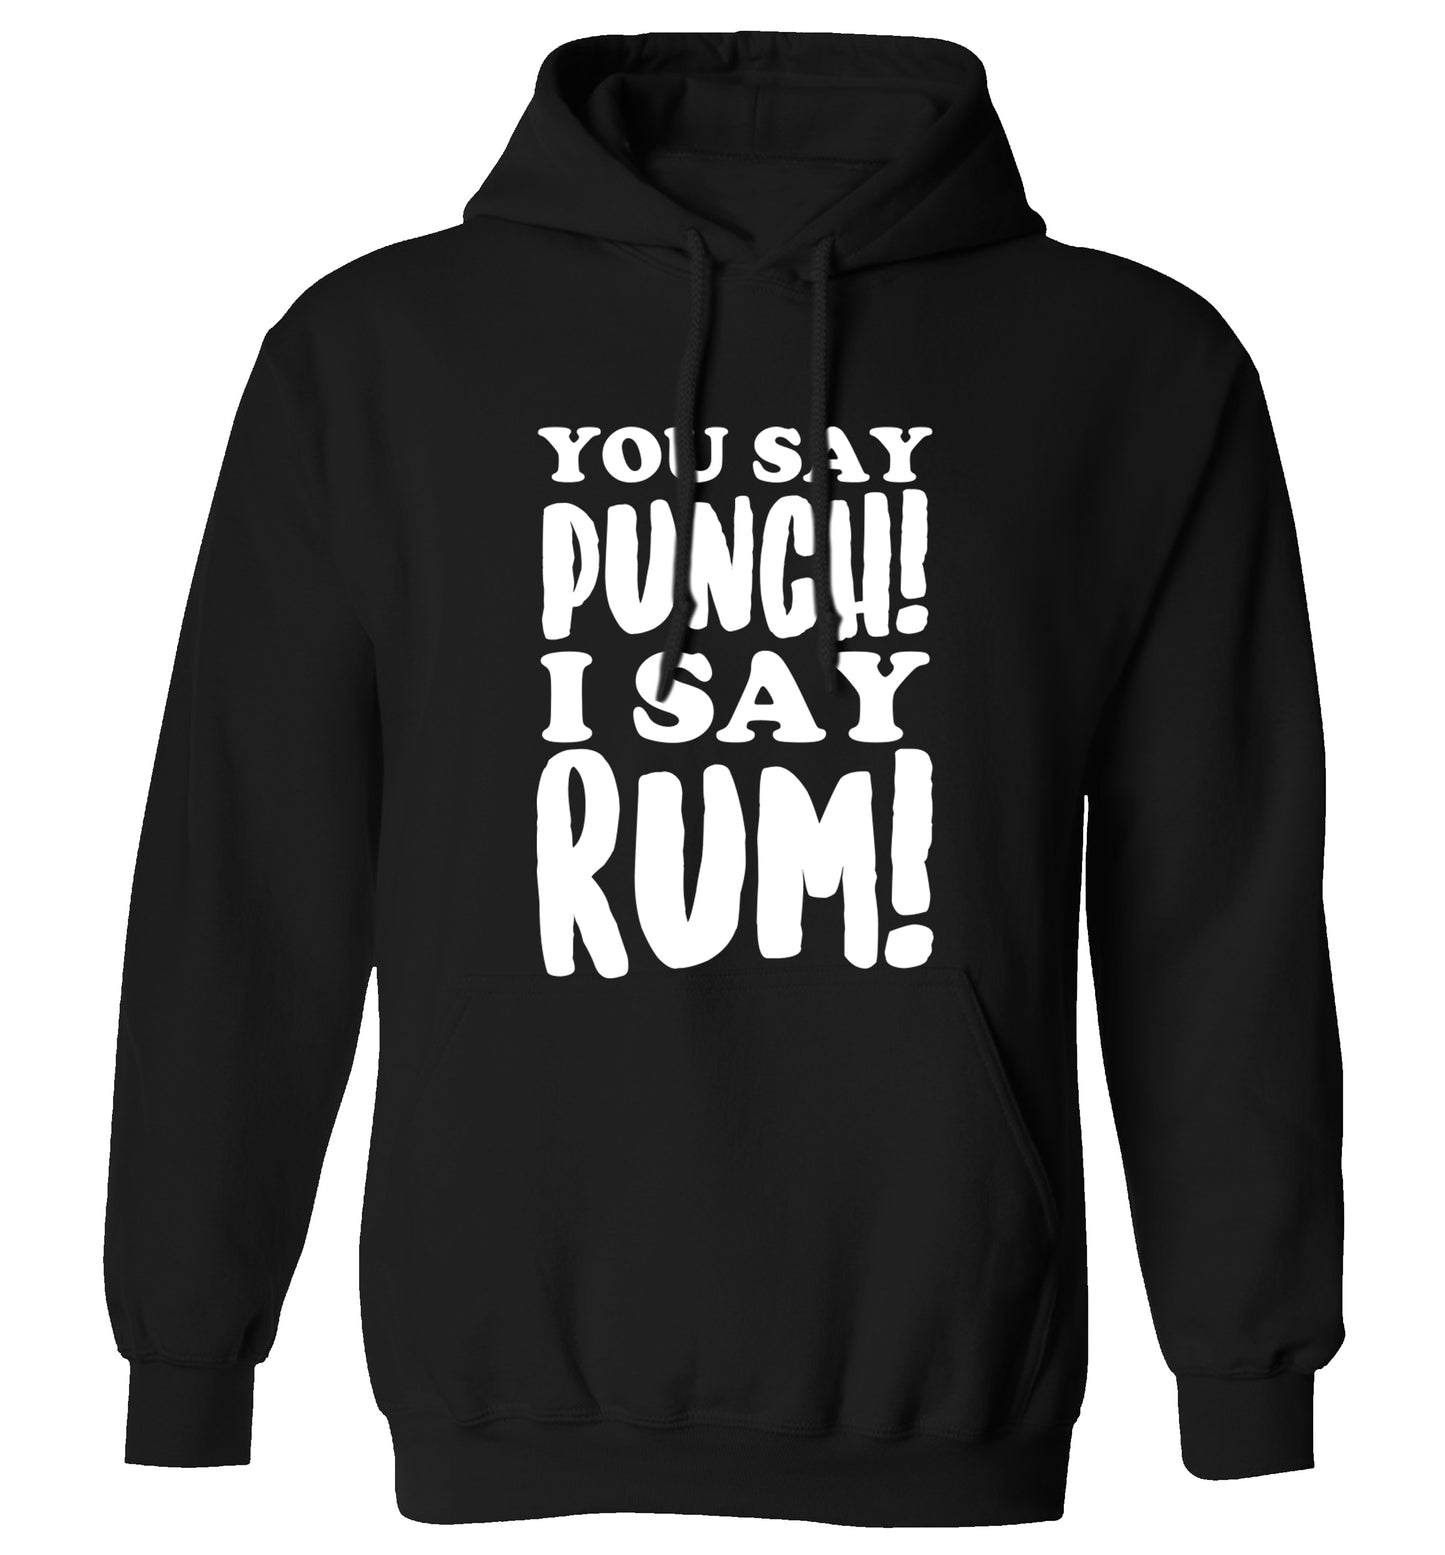 You say punch I say rum! adults unisex black hoodie 2XL